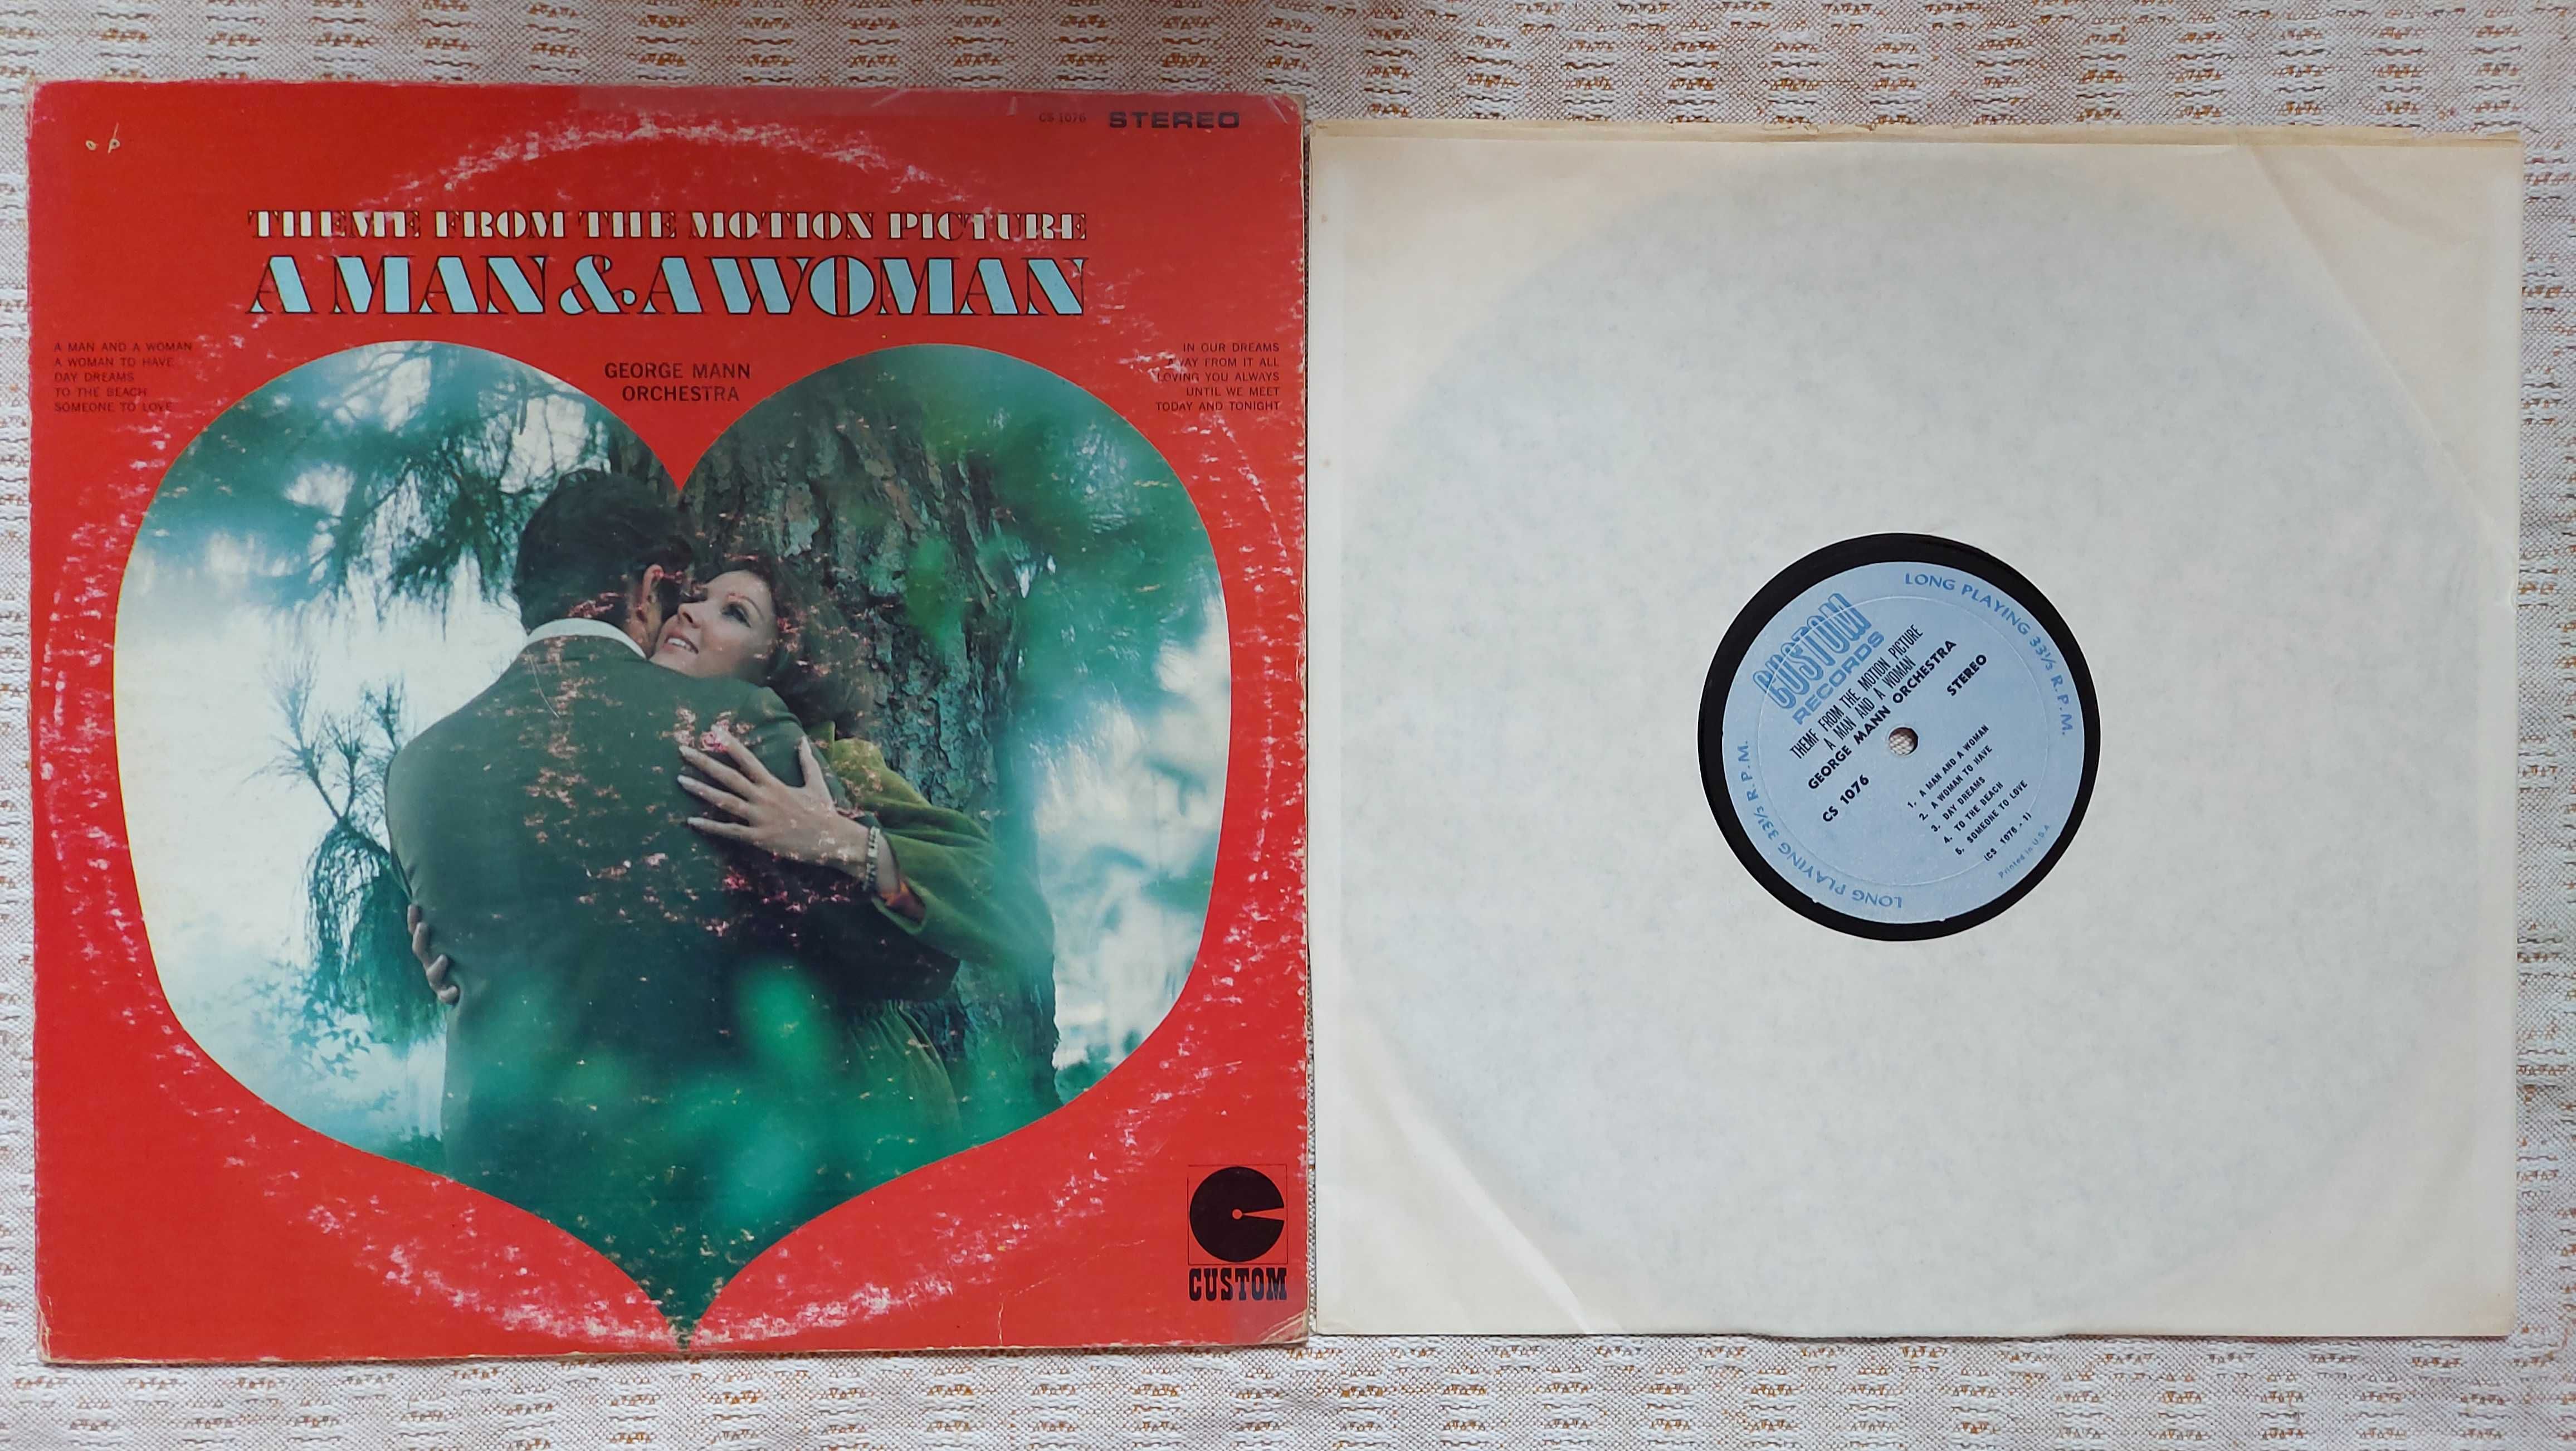 Soundtrack  Theme From The Motion Picture A Man & A Woman US (VG/VG)